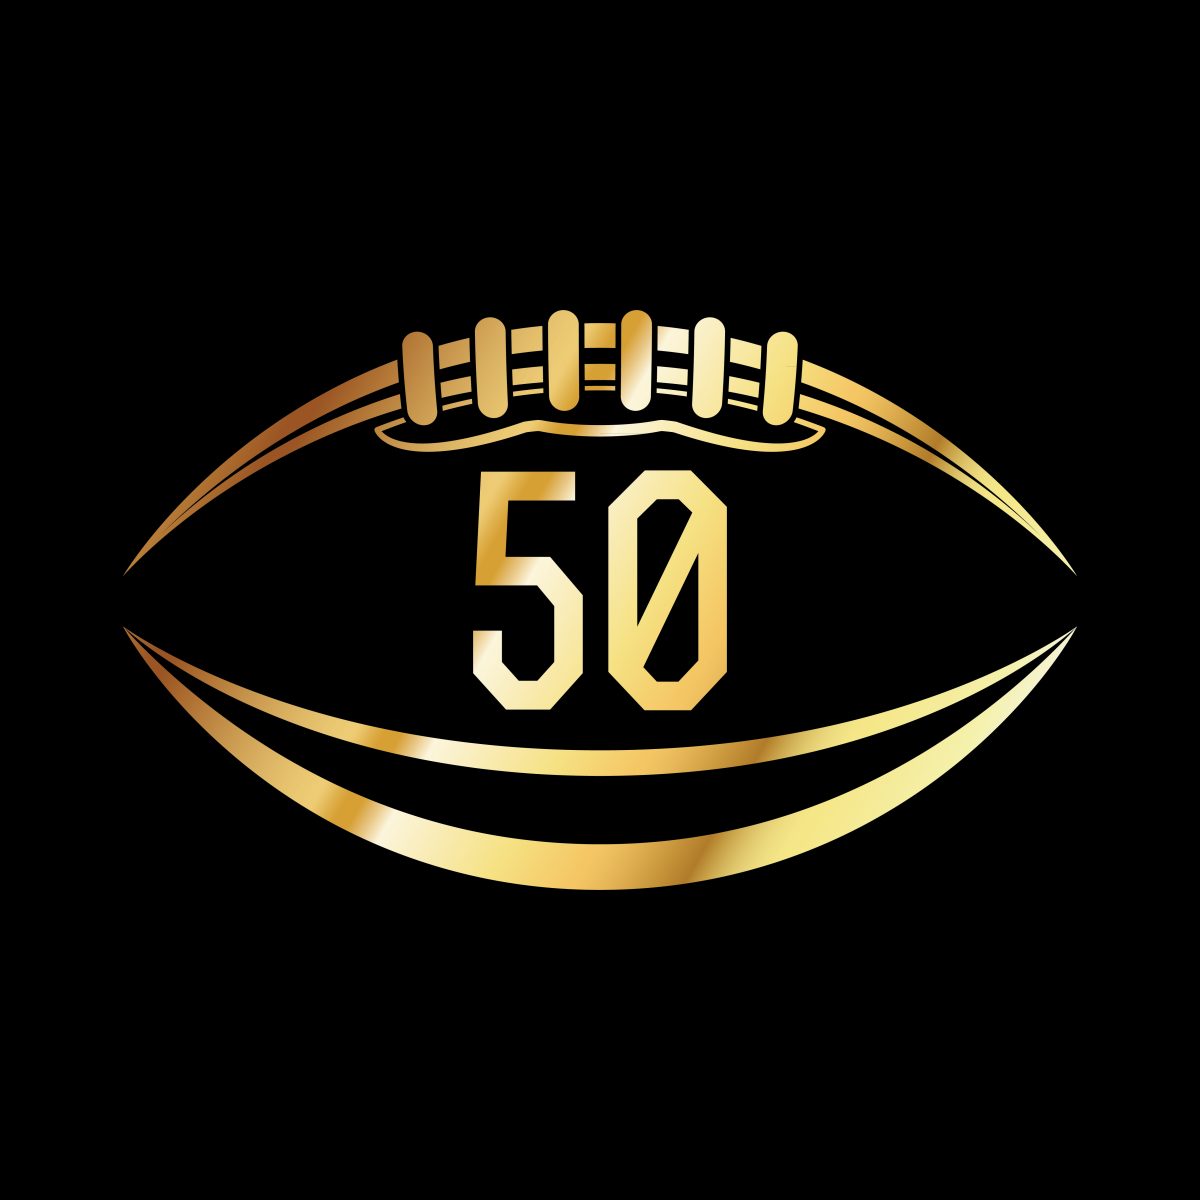 Sb50: Strong Broadcast Audience, Weak Social Engagement